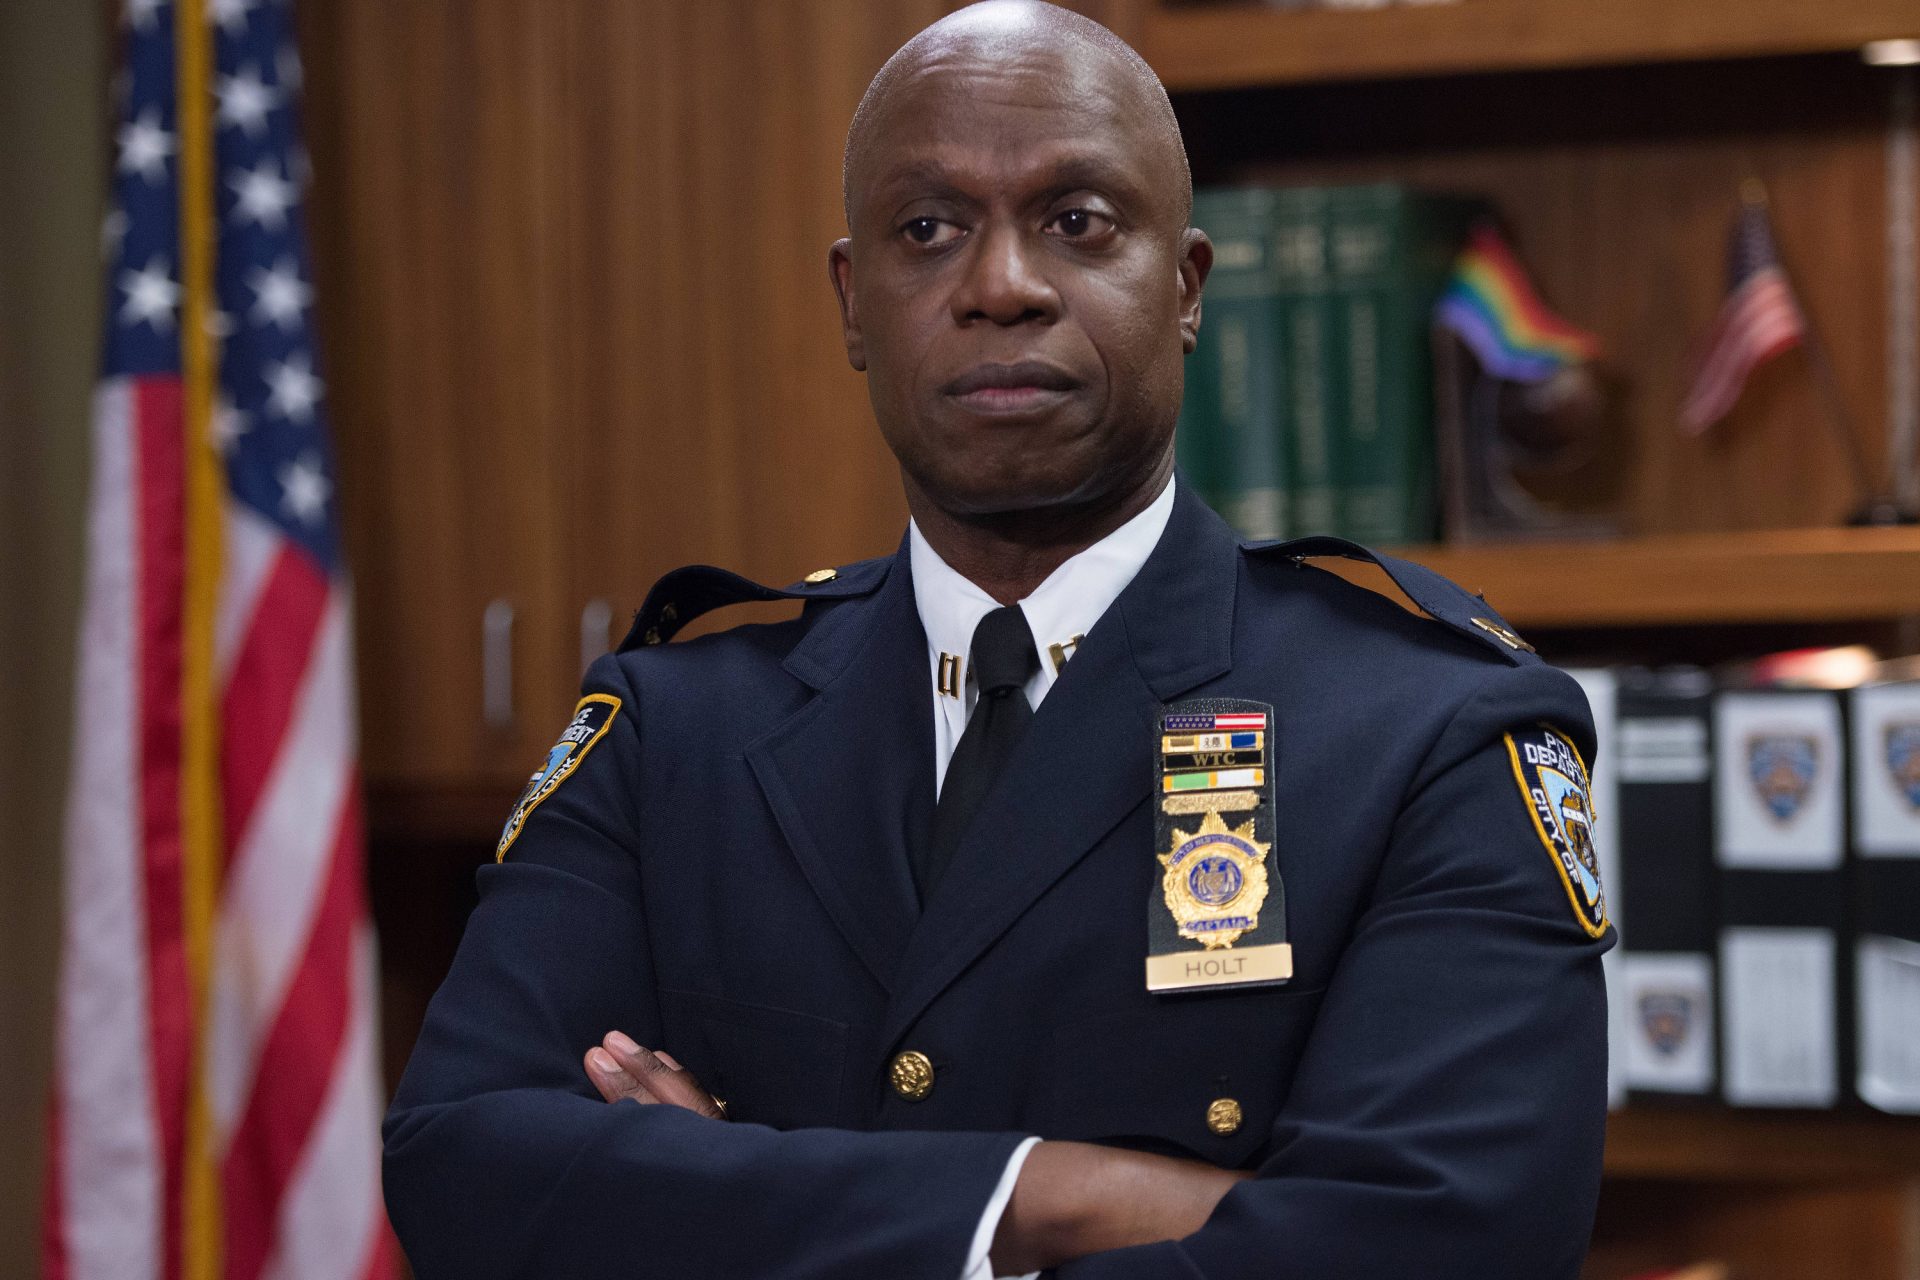 Best known for playing Captain Raymond Holt in ‘Brooklyn Nine-Nine’